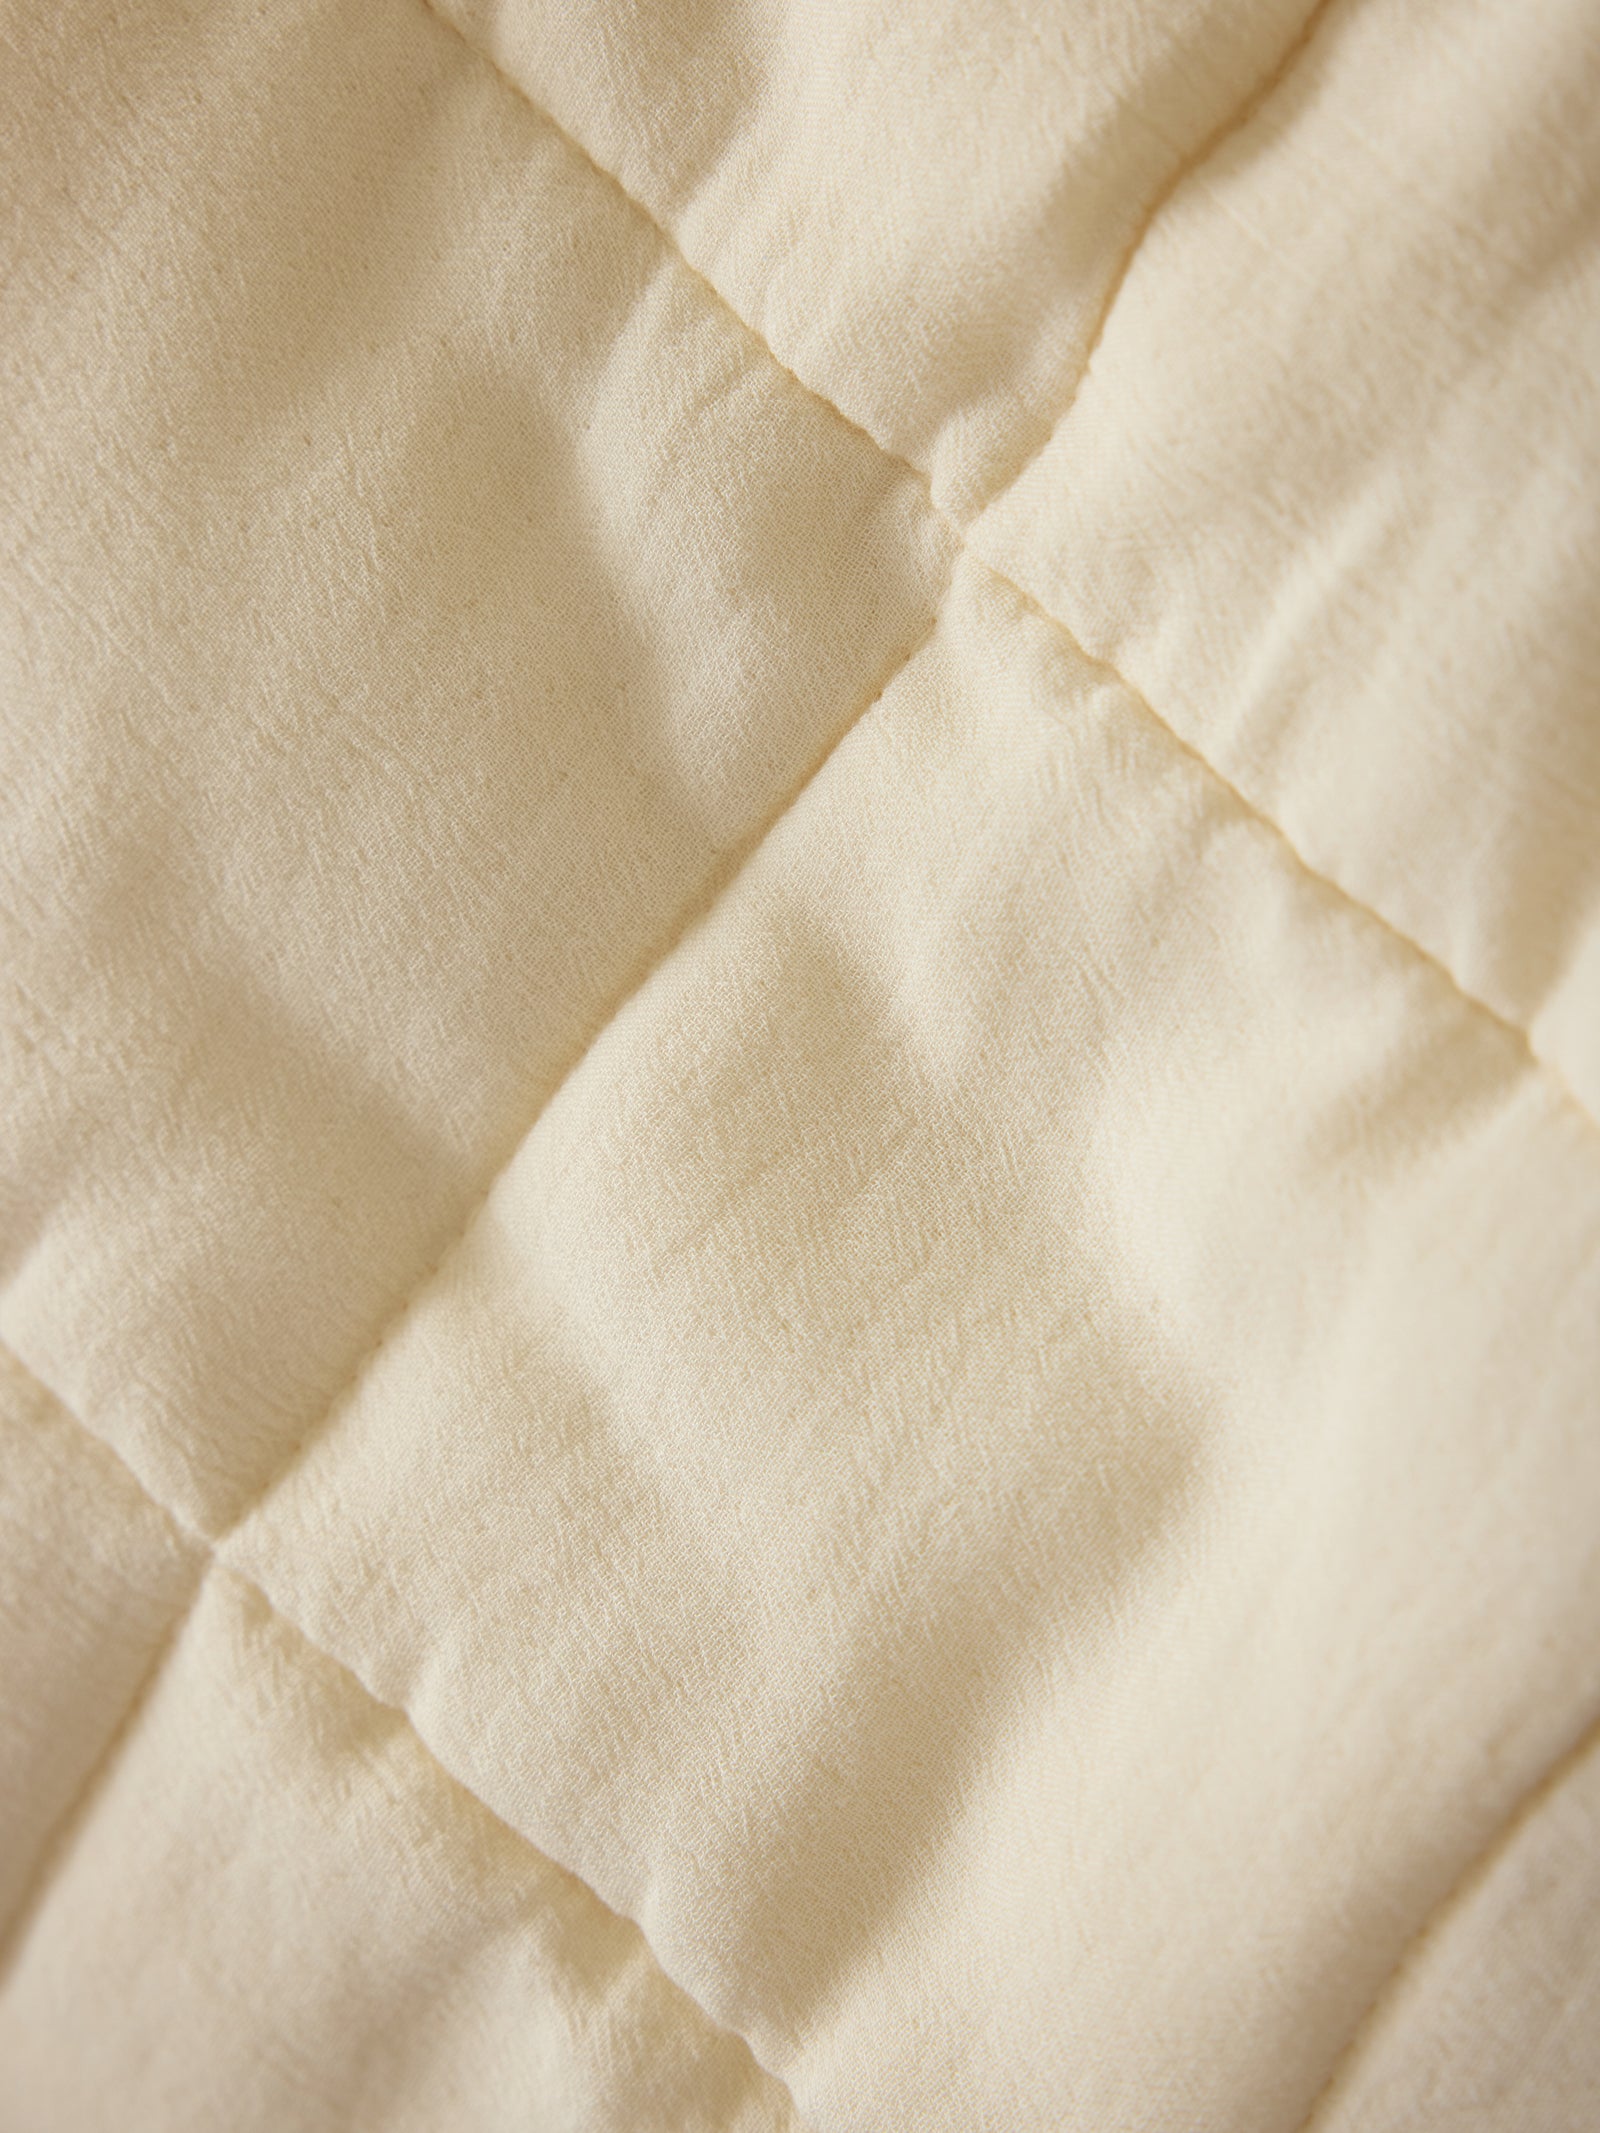 Close up of Buttermilk Aire Bamboo Box Quilt Euro Sham. The sham is resting on a bed in a bedroom